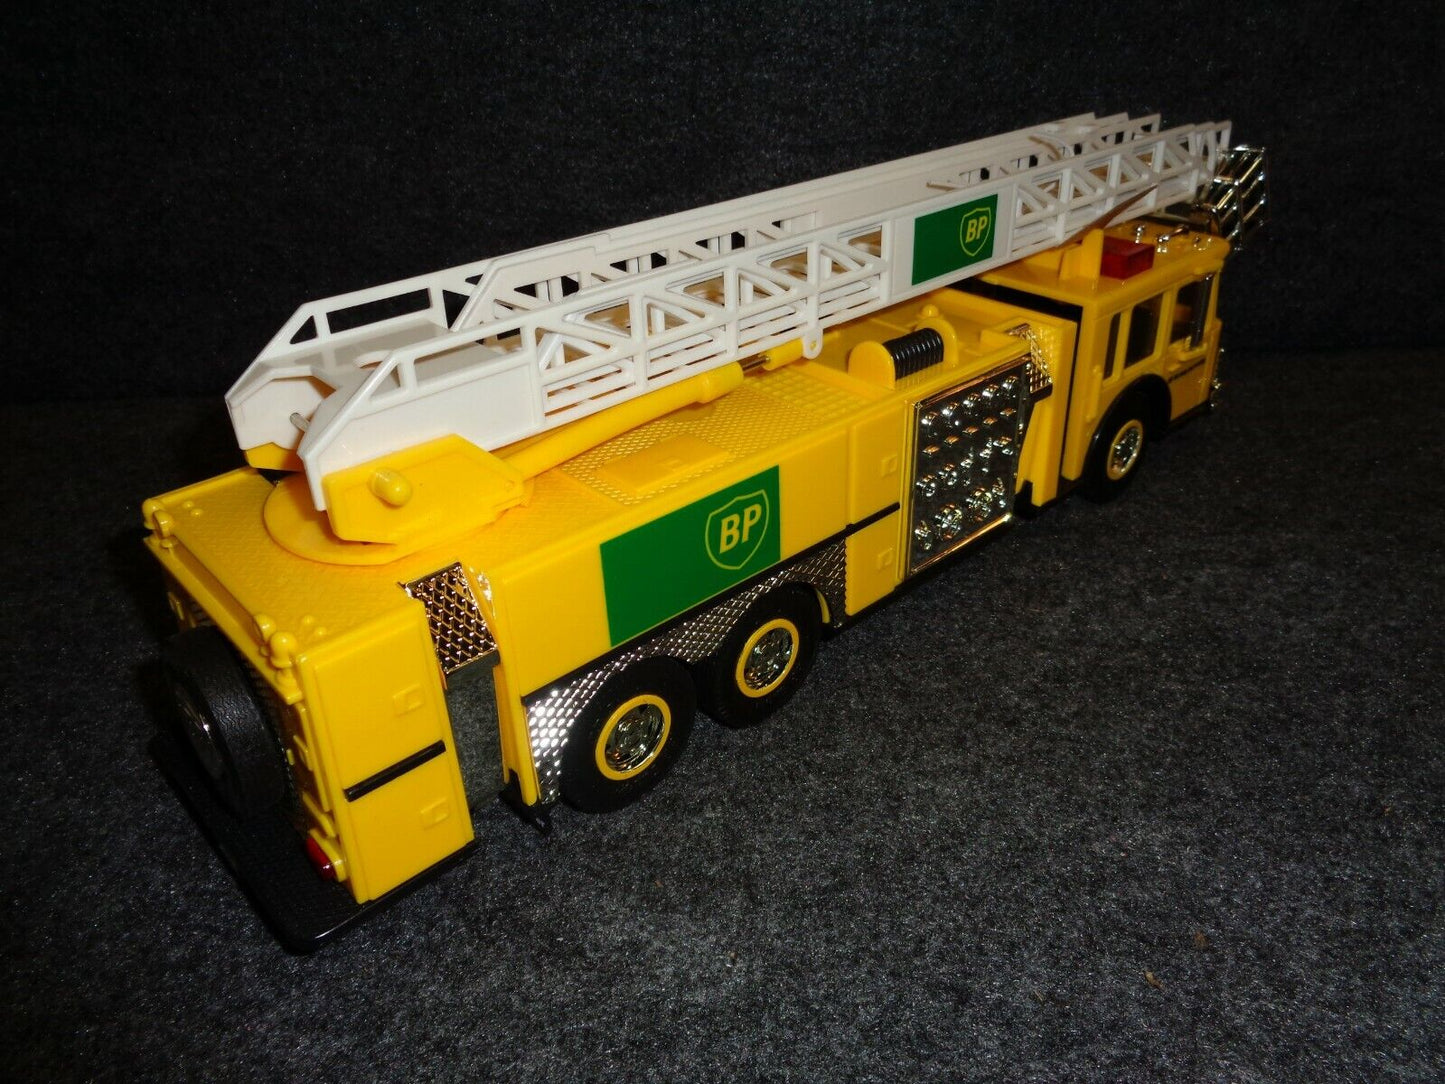 BP 1998 Toy Fire Truck - Credit Card Edition